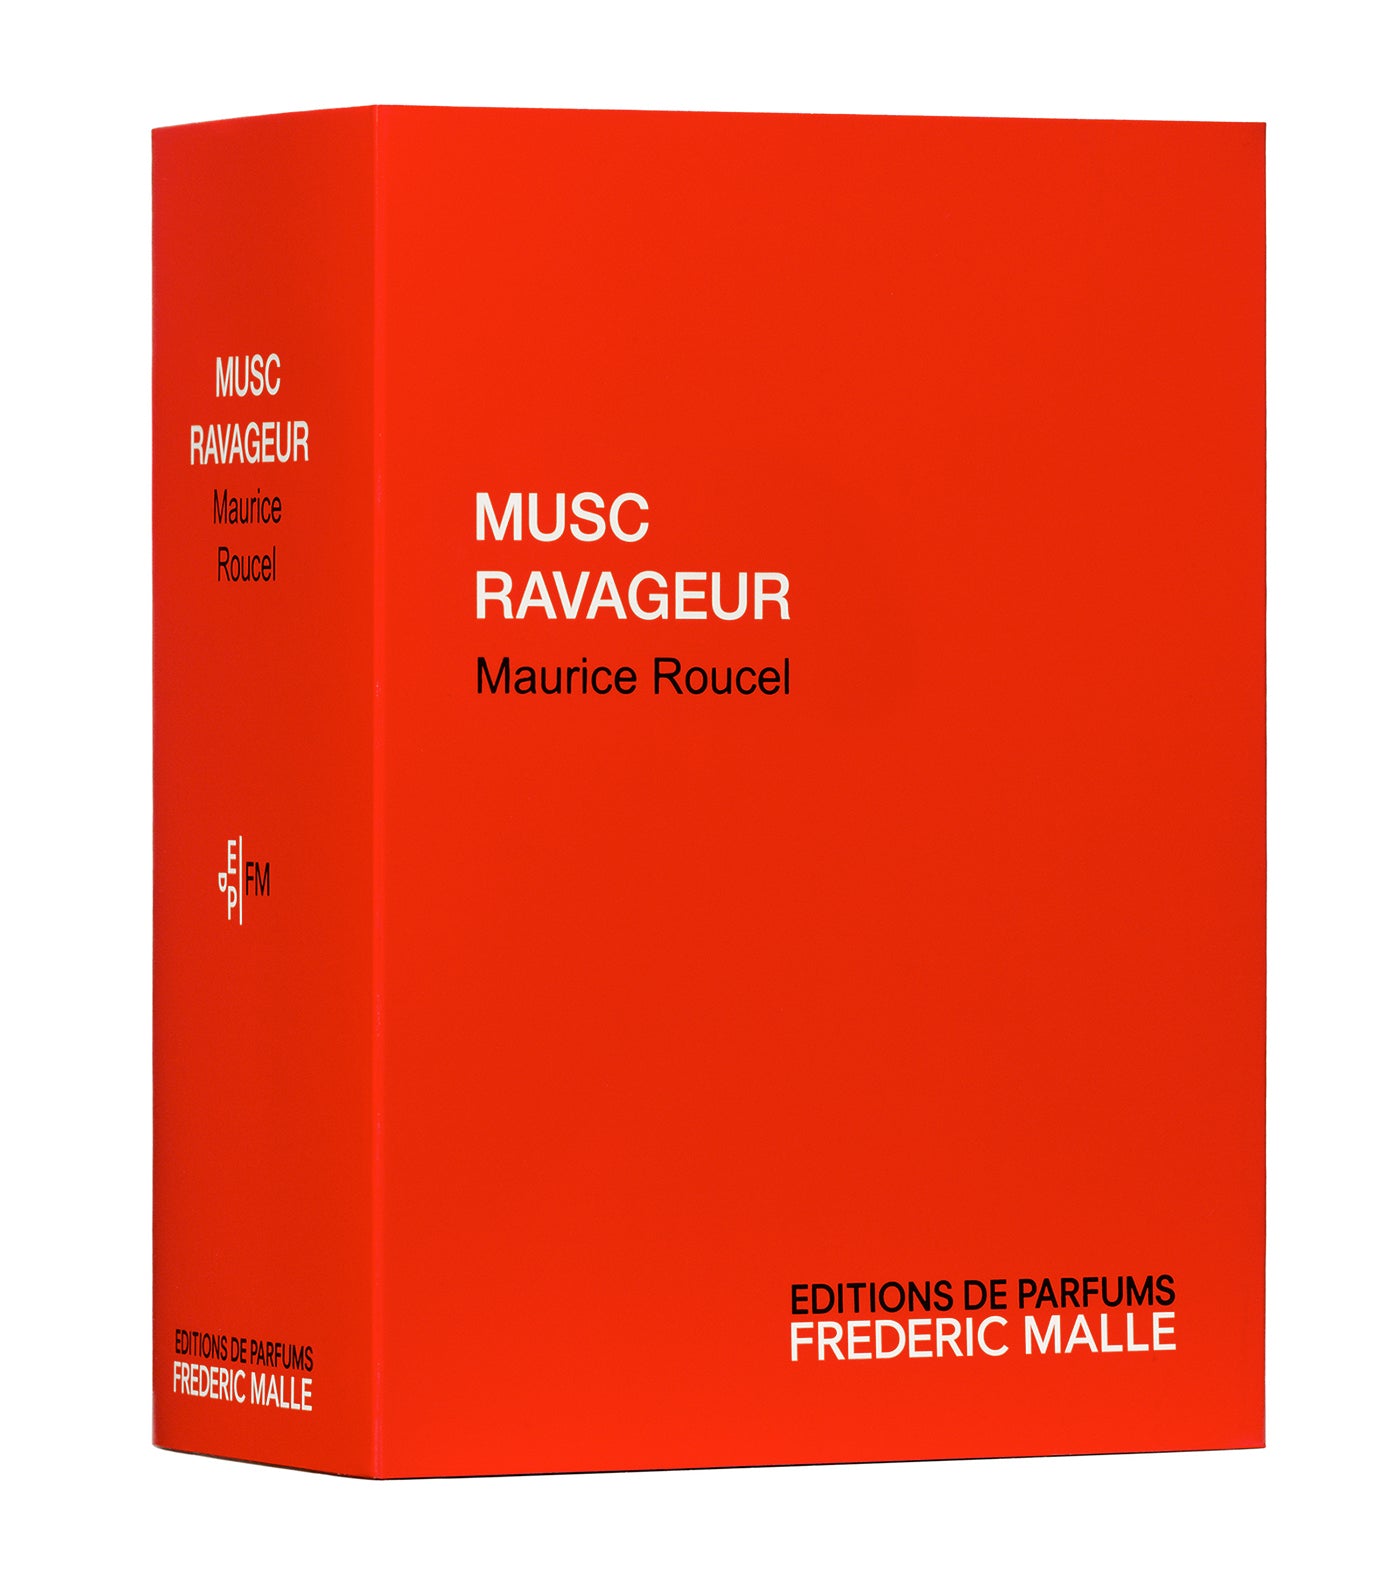 Musc Ravageur Perfume by Maurice Roucel